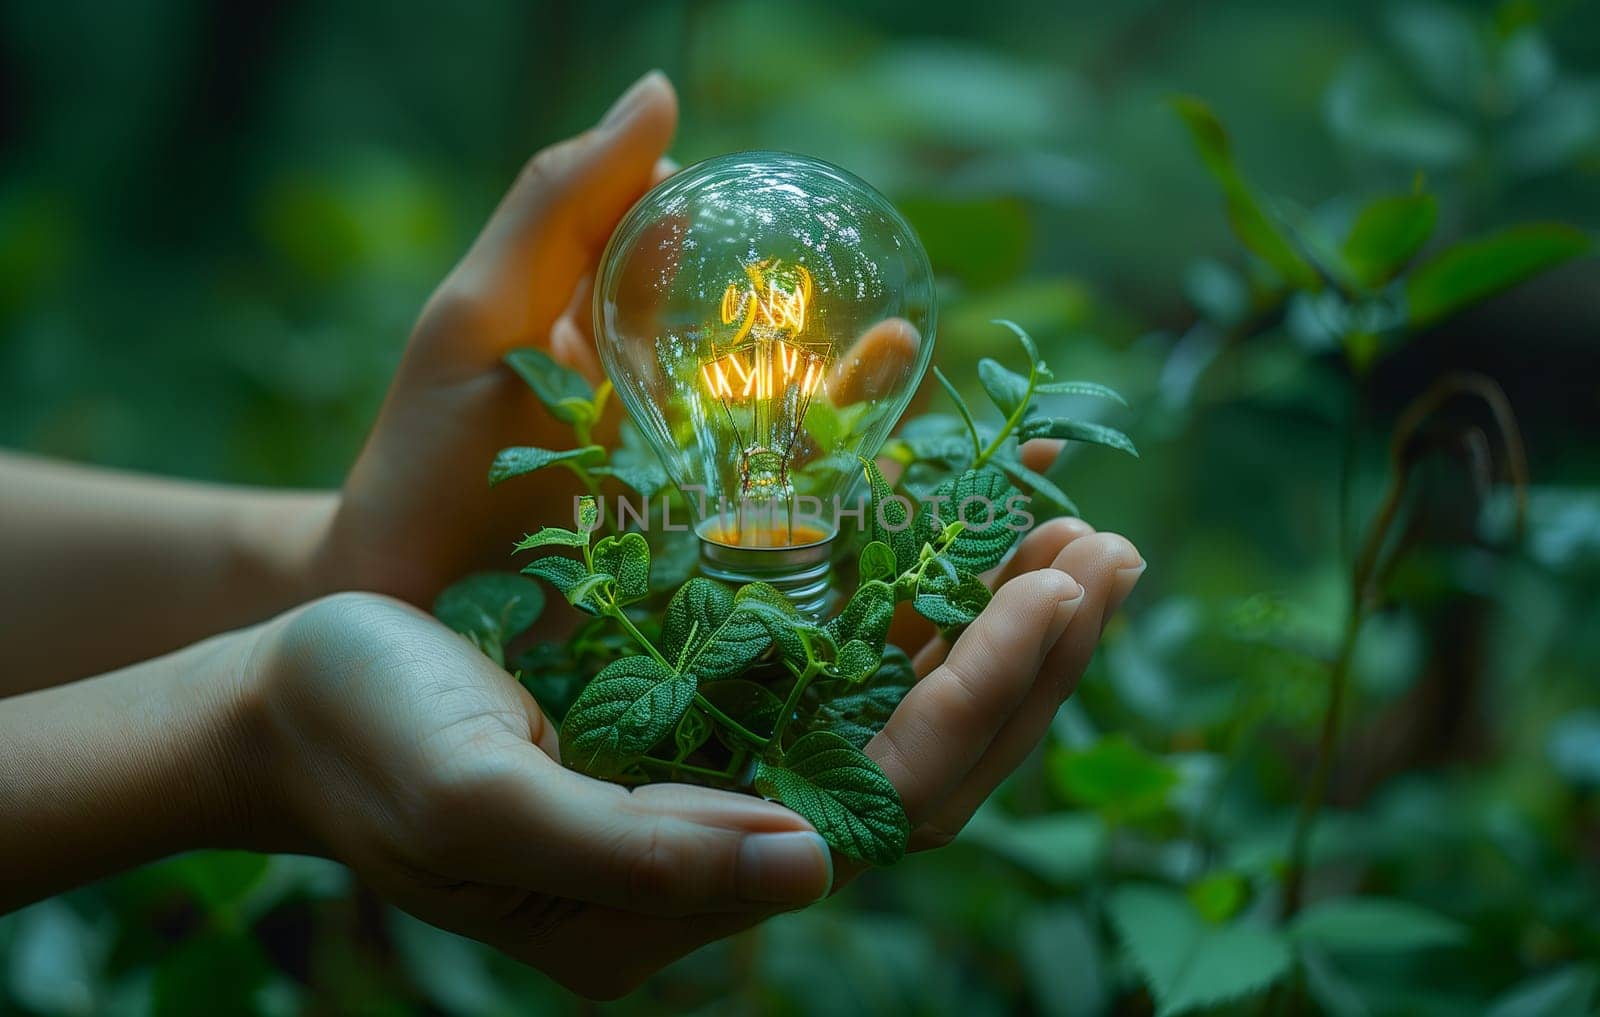 Person holding a light bulb with a plant inside, showcasing the beauty of terrestrial plants. This unique display combines nature and modern design, creating a miniature natural landscape